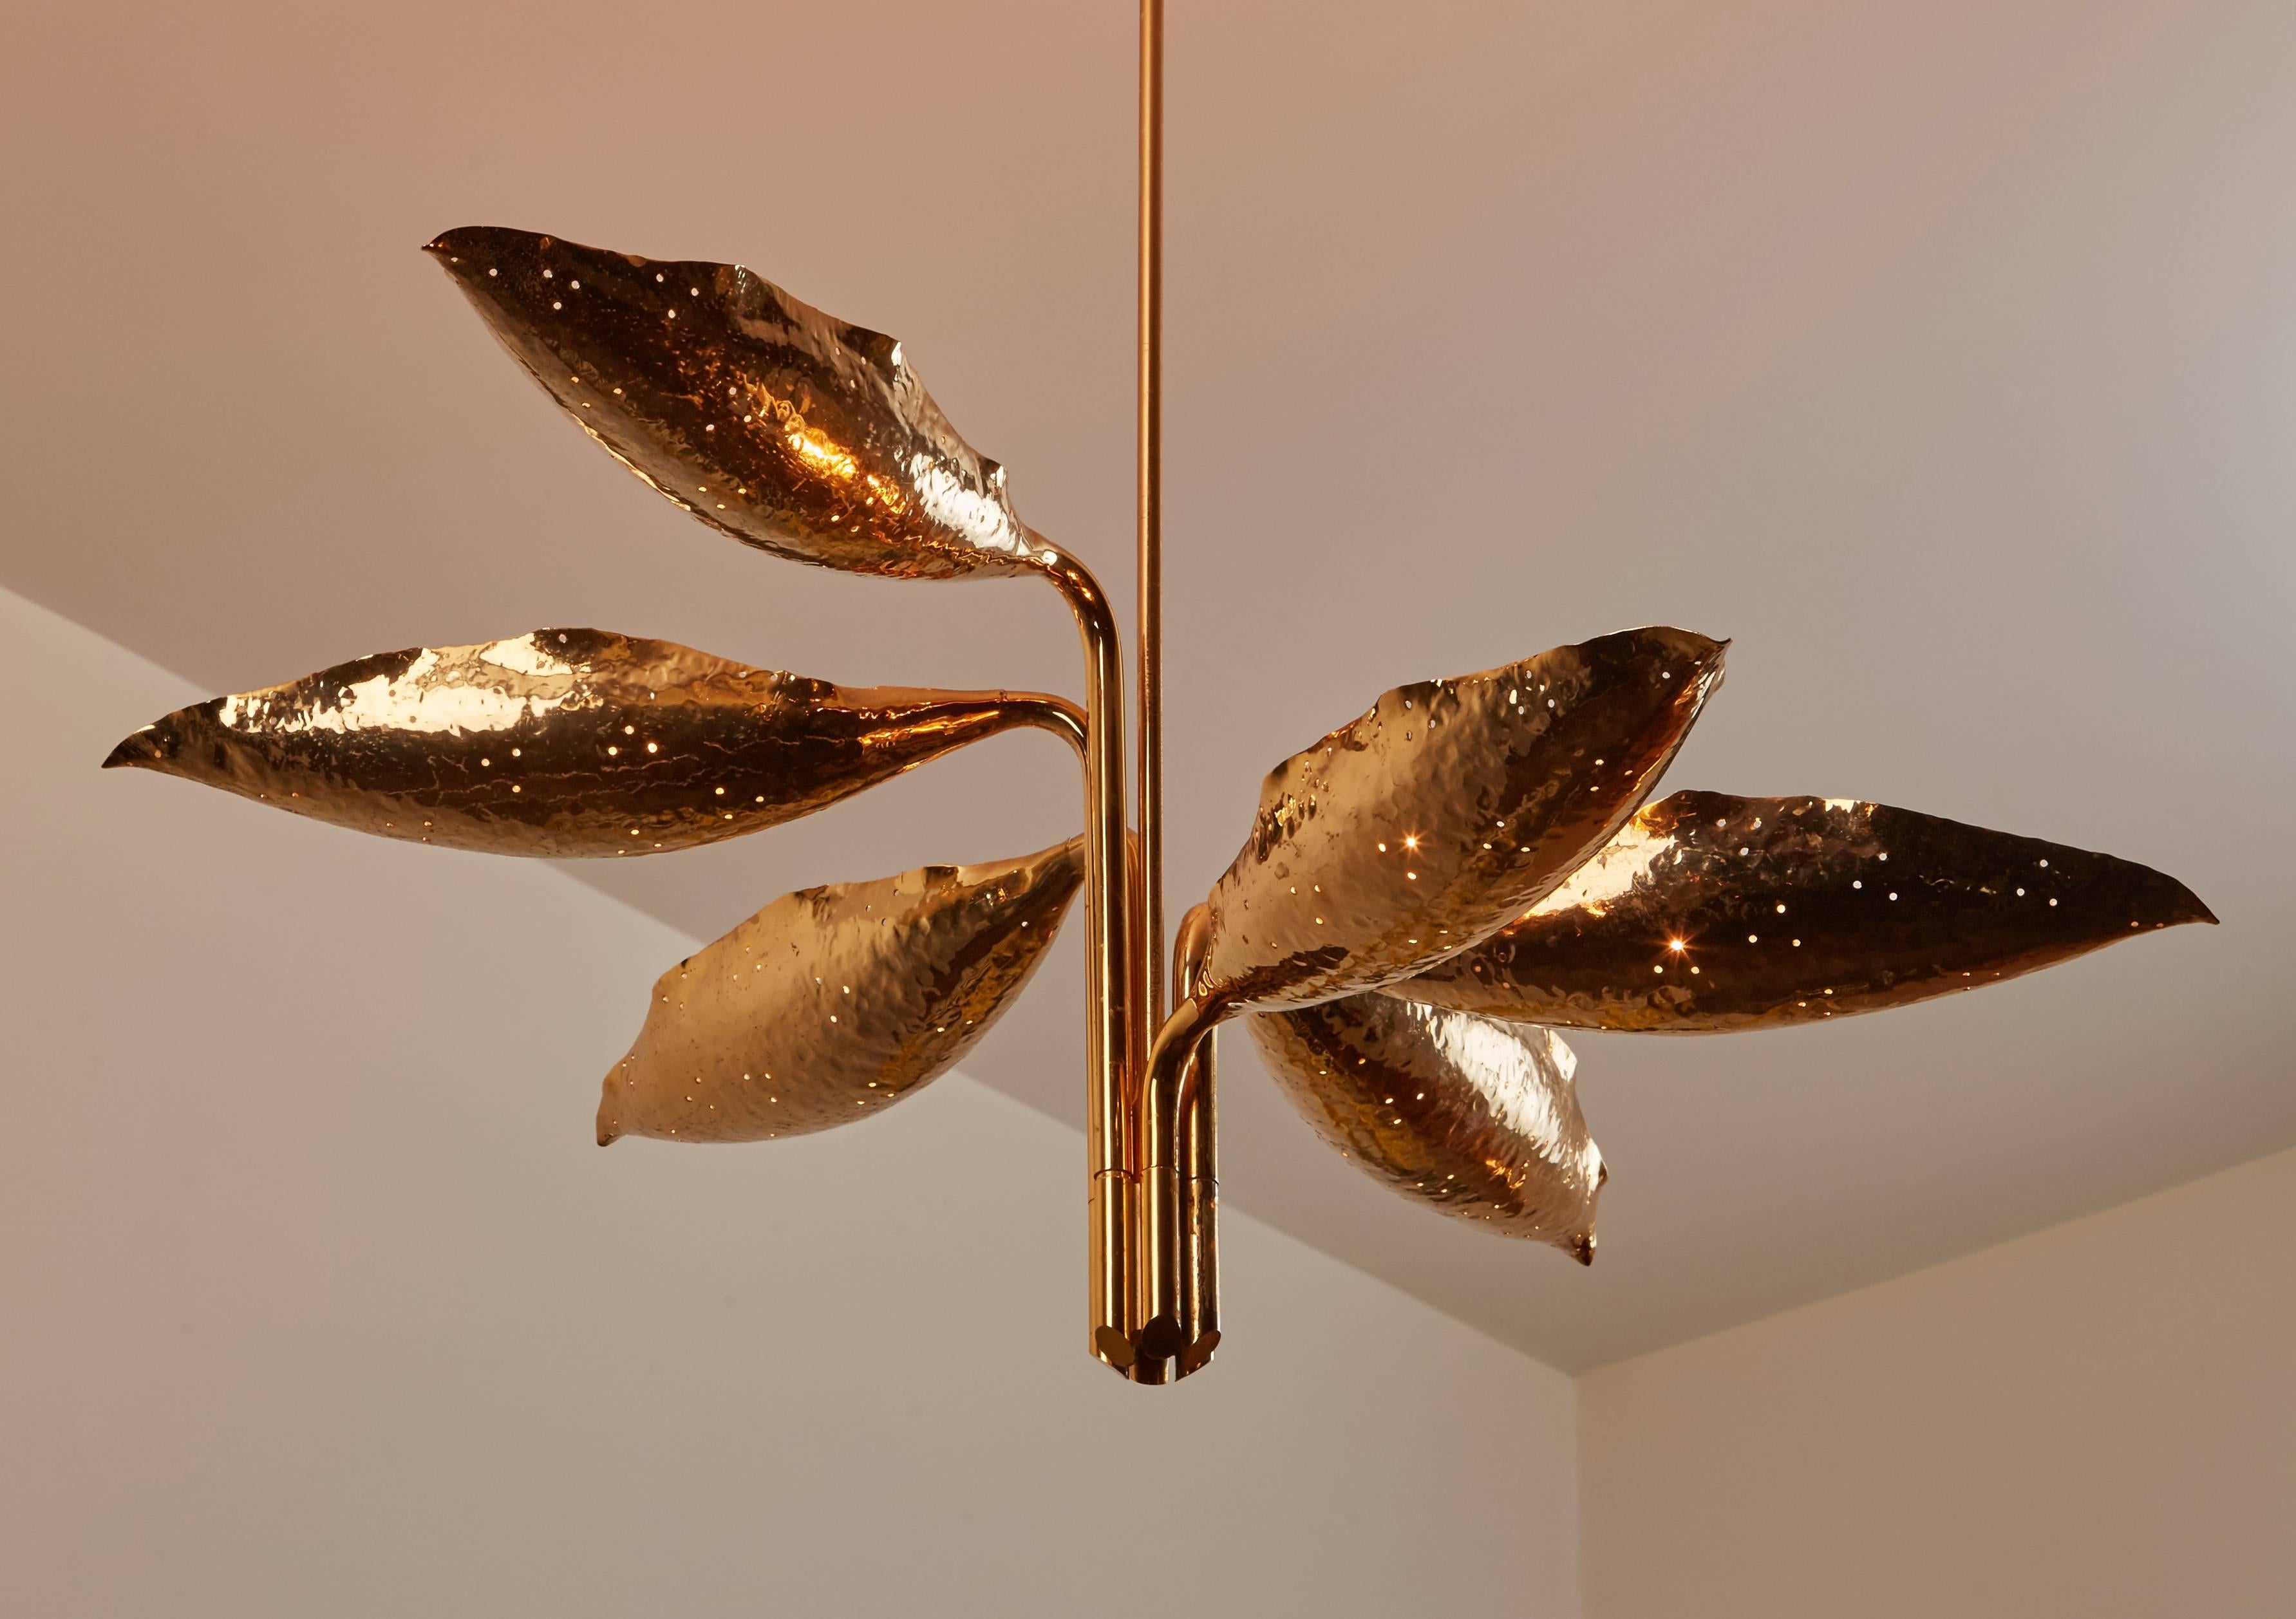 Hand-hammered and perforated brass six-arm chandelier by Angelo Lelli, designed in Italy, circa 1950s. Manufactured by Arredoluce, Monza, Italy. Wired for US junction boxes. Takes six E27 40w maximum bulbs.